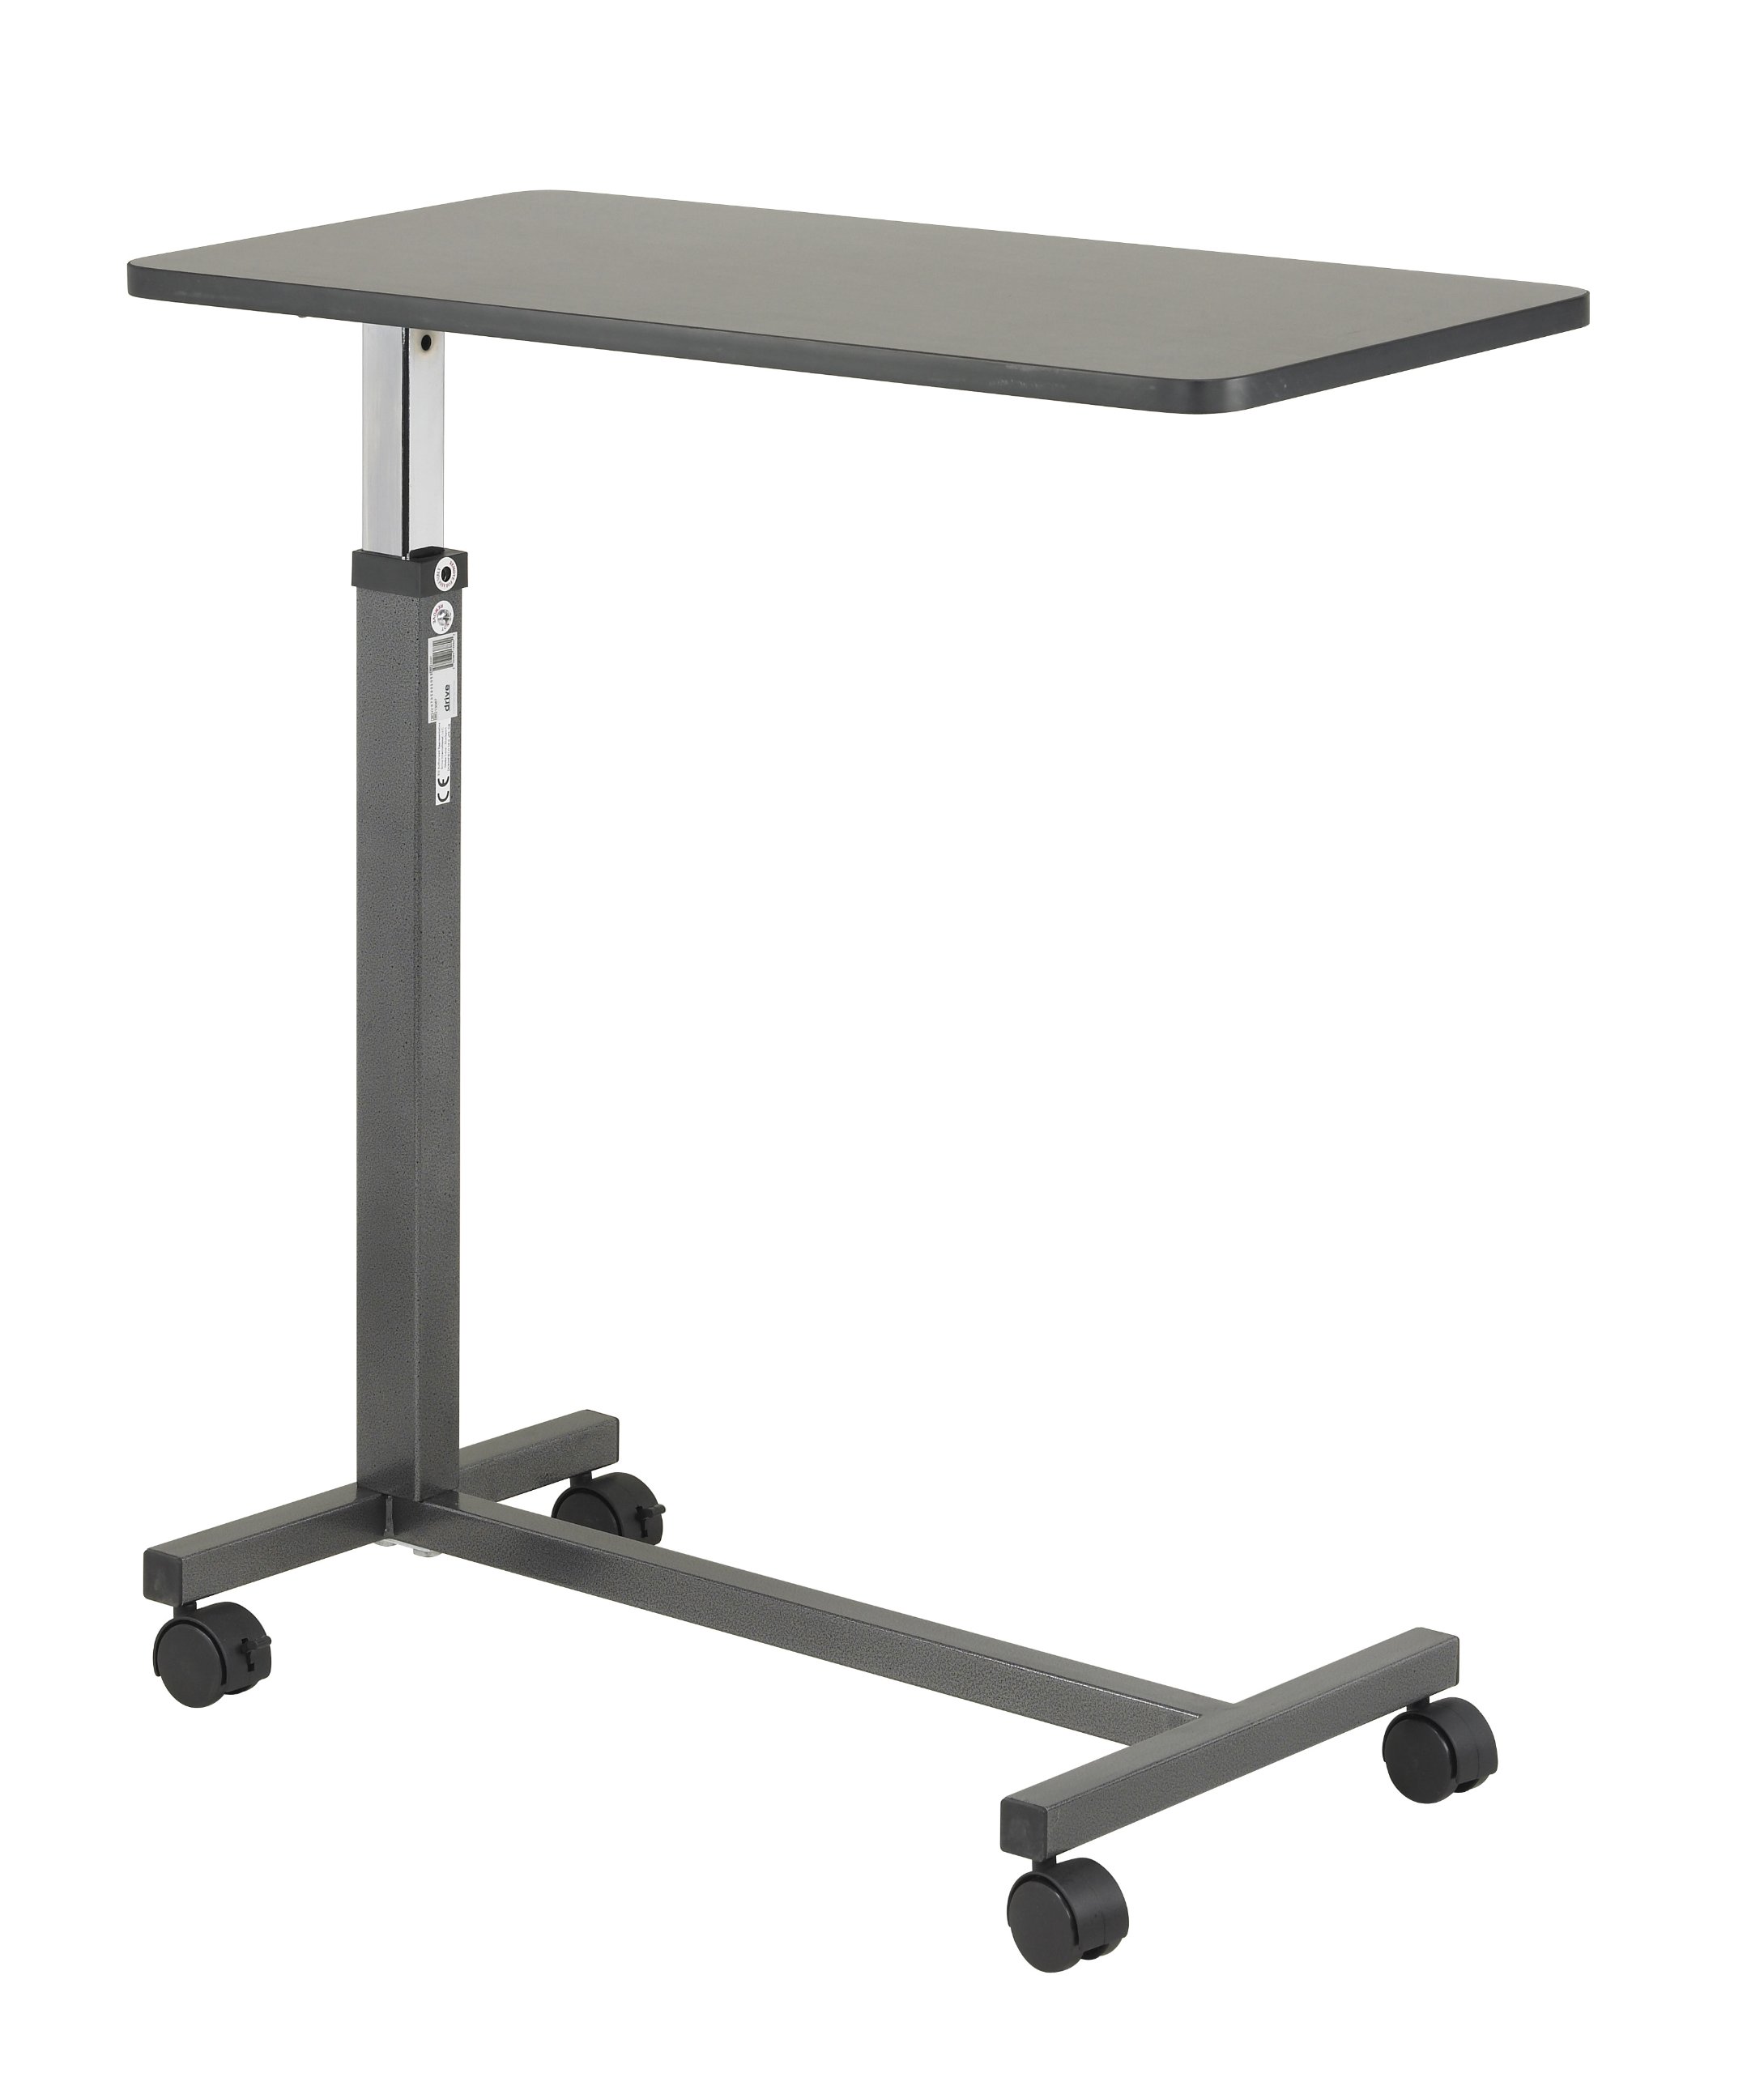 Drive Medical 13067 Adjustable Non Tilt Top Overbed Table with Wheels for Hospital and Home Use & 11148-1 Folding Steel Bedside Commode Chair